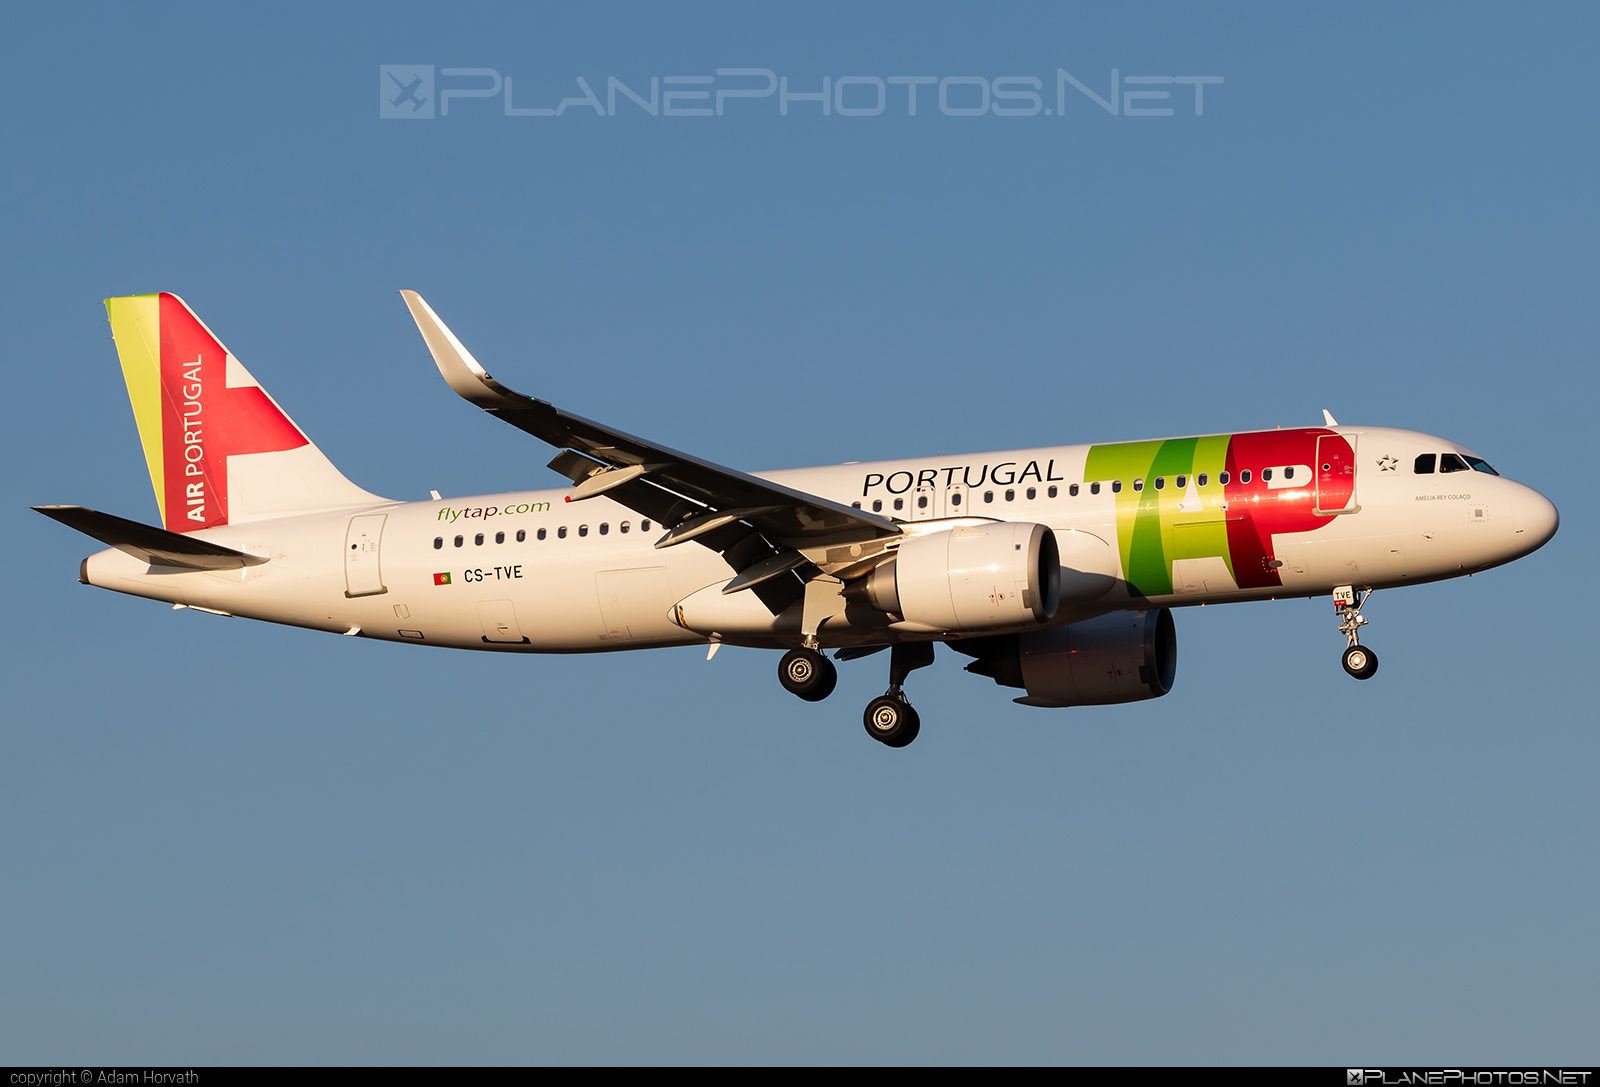 Airbus A320-251N - CS-TVE operated by TAP Portugal #a320 #a320family #a320neo #airbus #airbus320 #tap #tapportugal